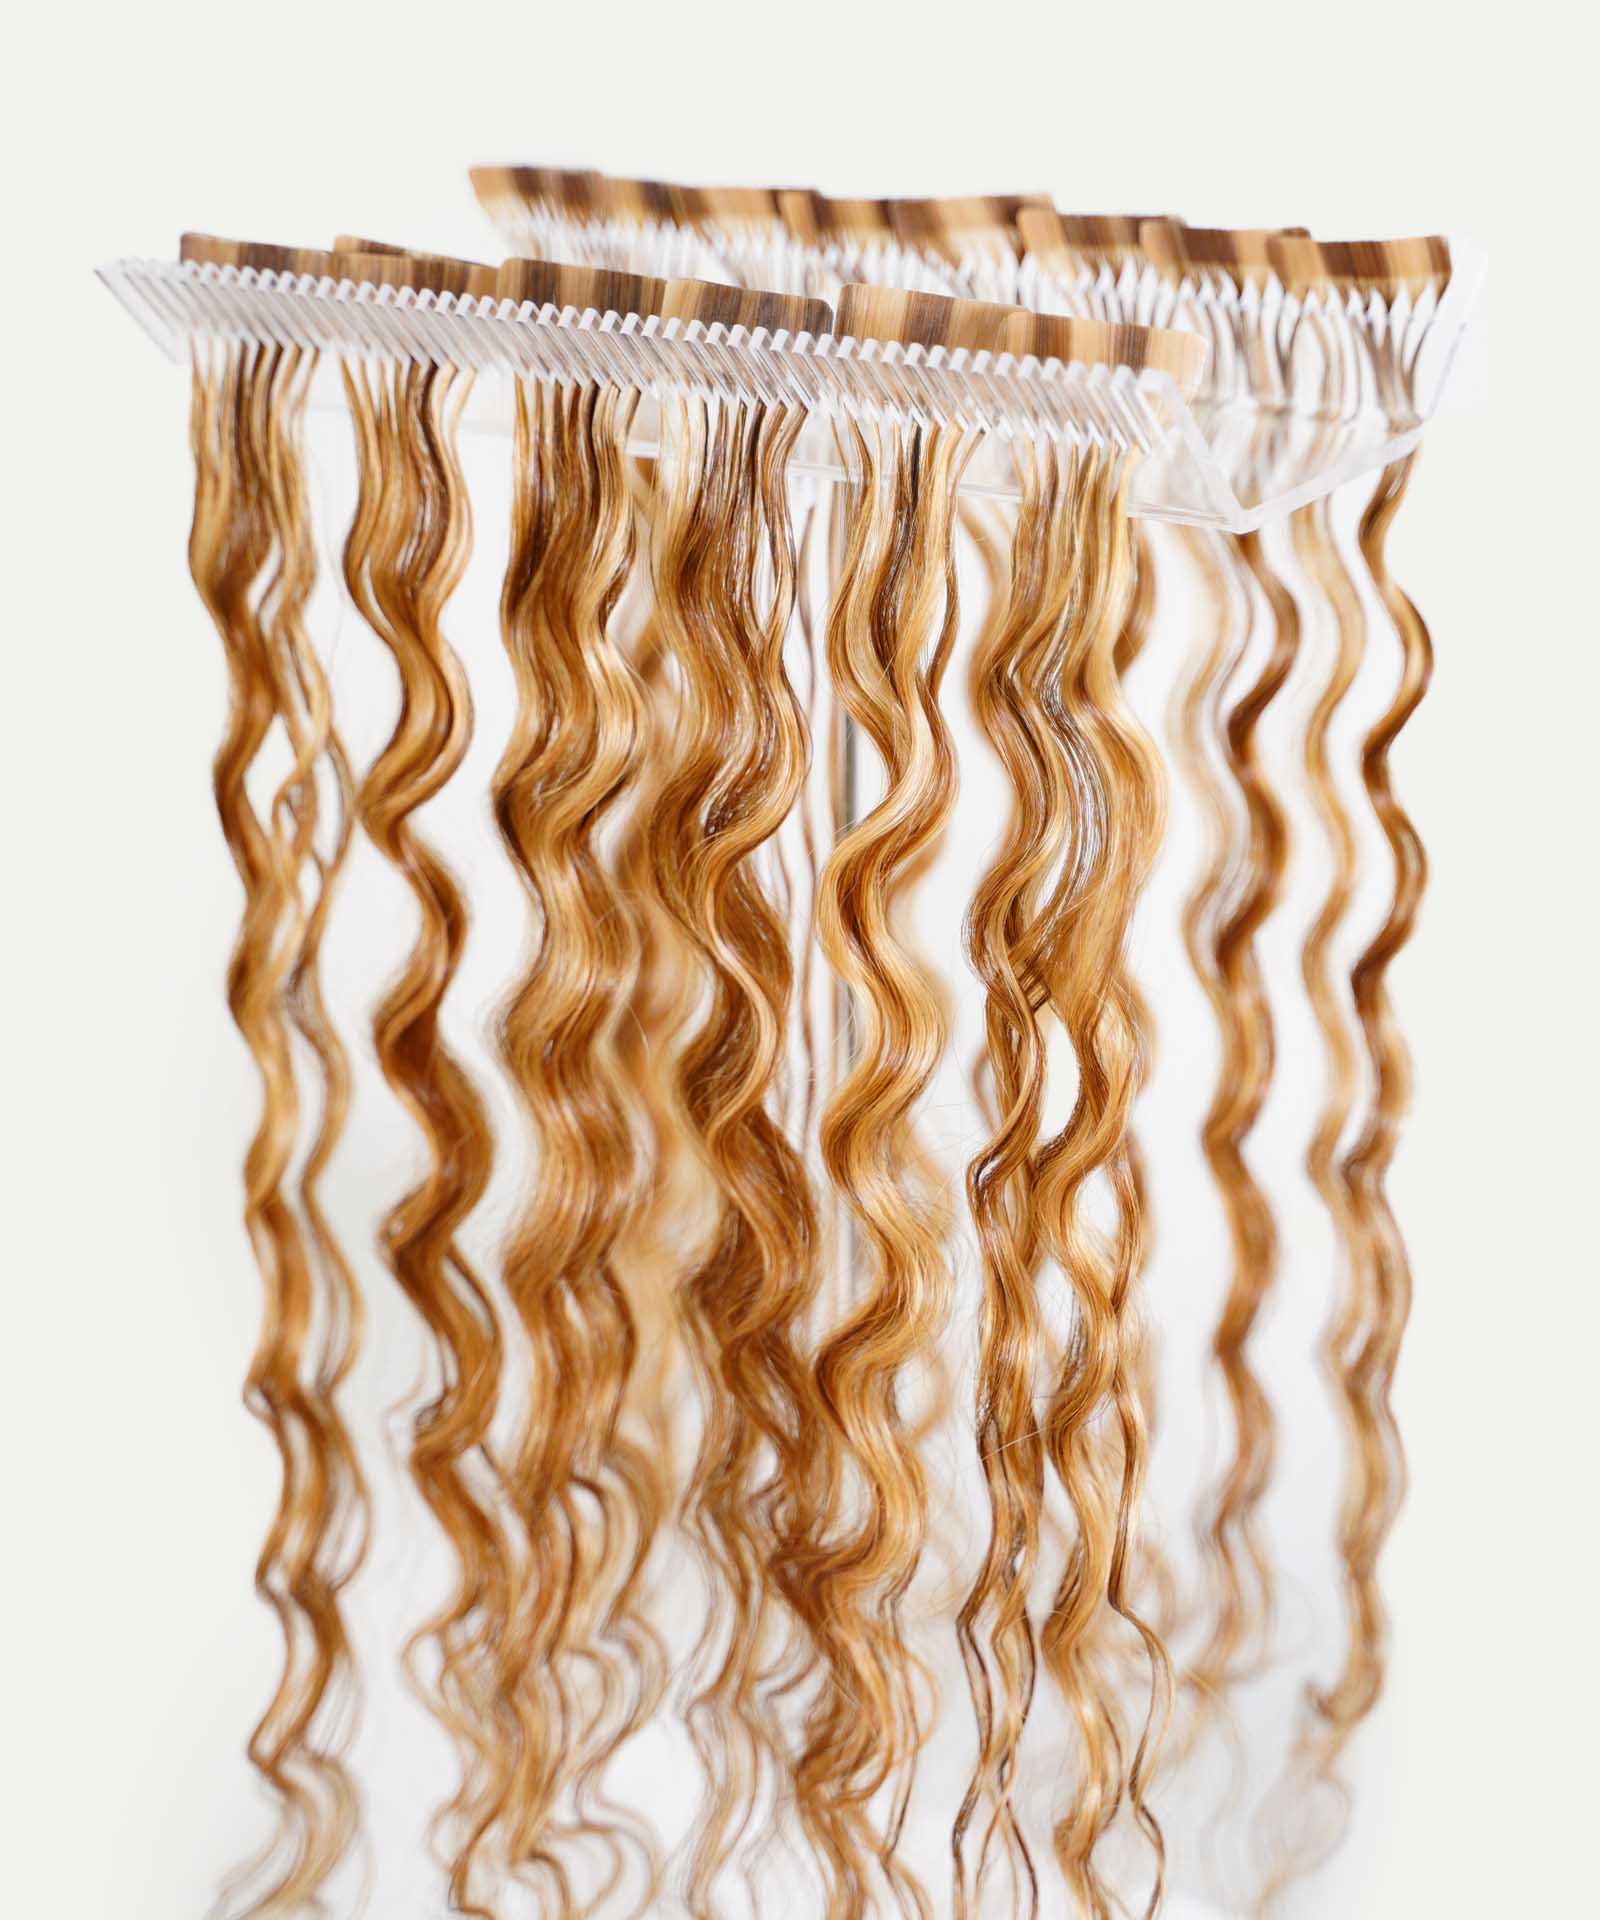  Hair Extension Holder and 10 Hair Pad Set, Acrylic